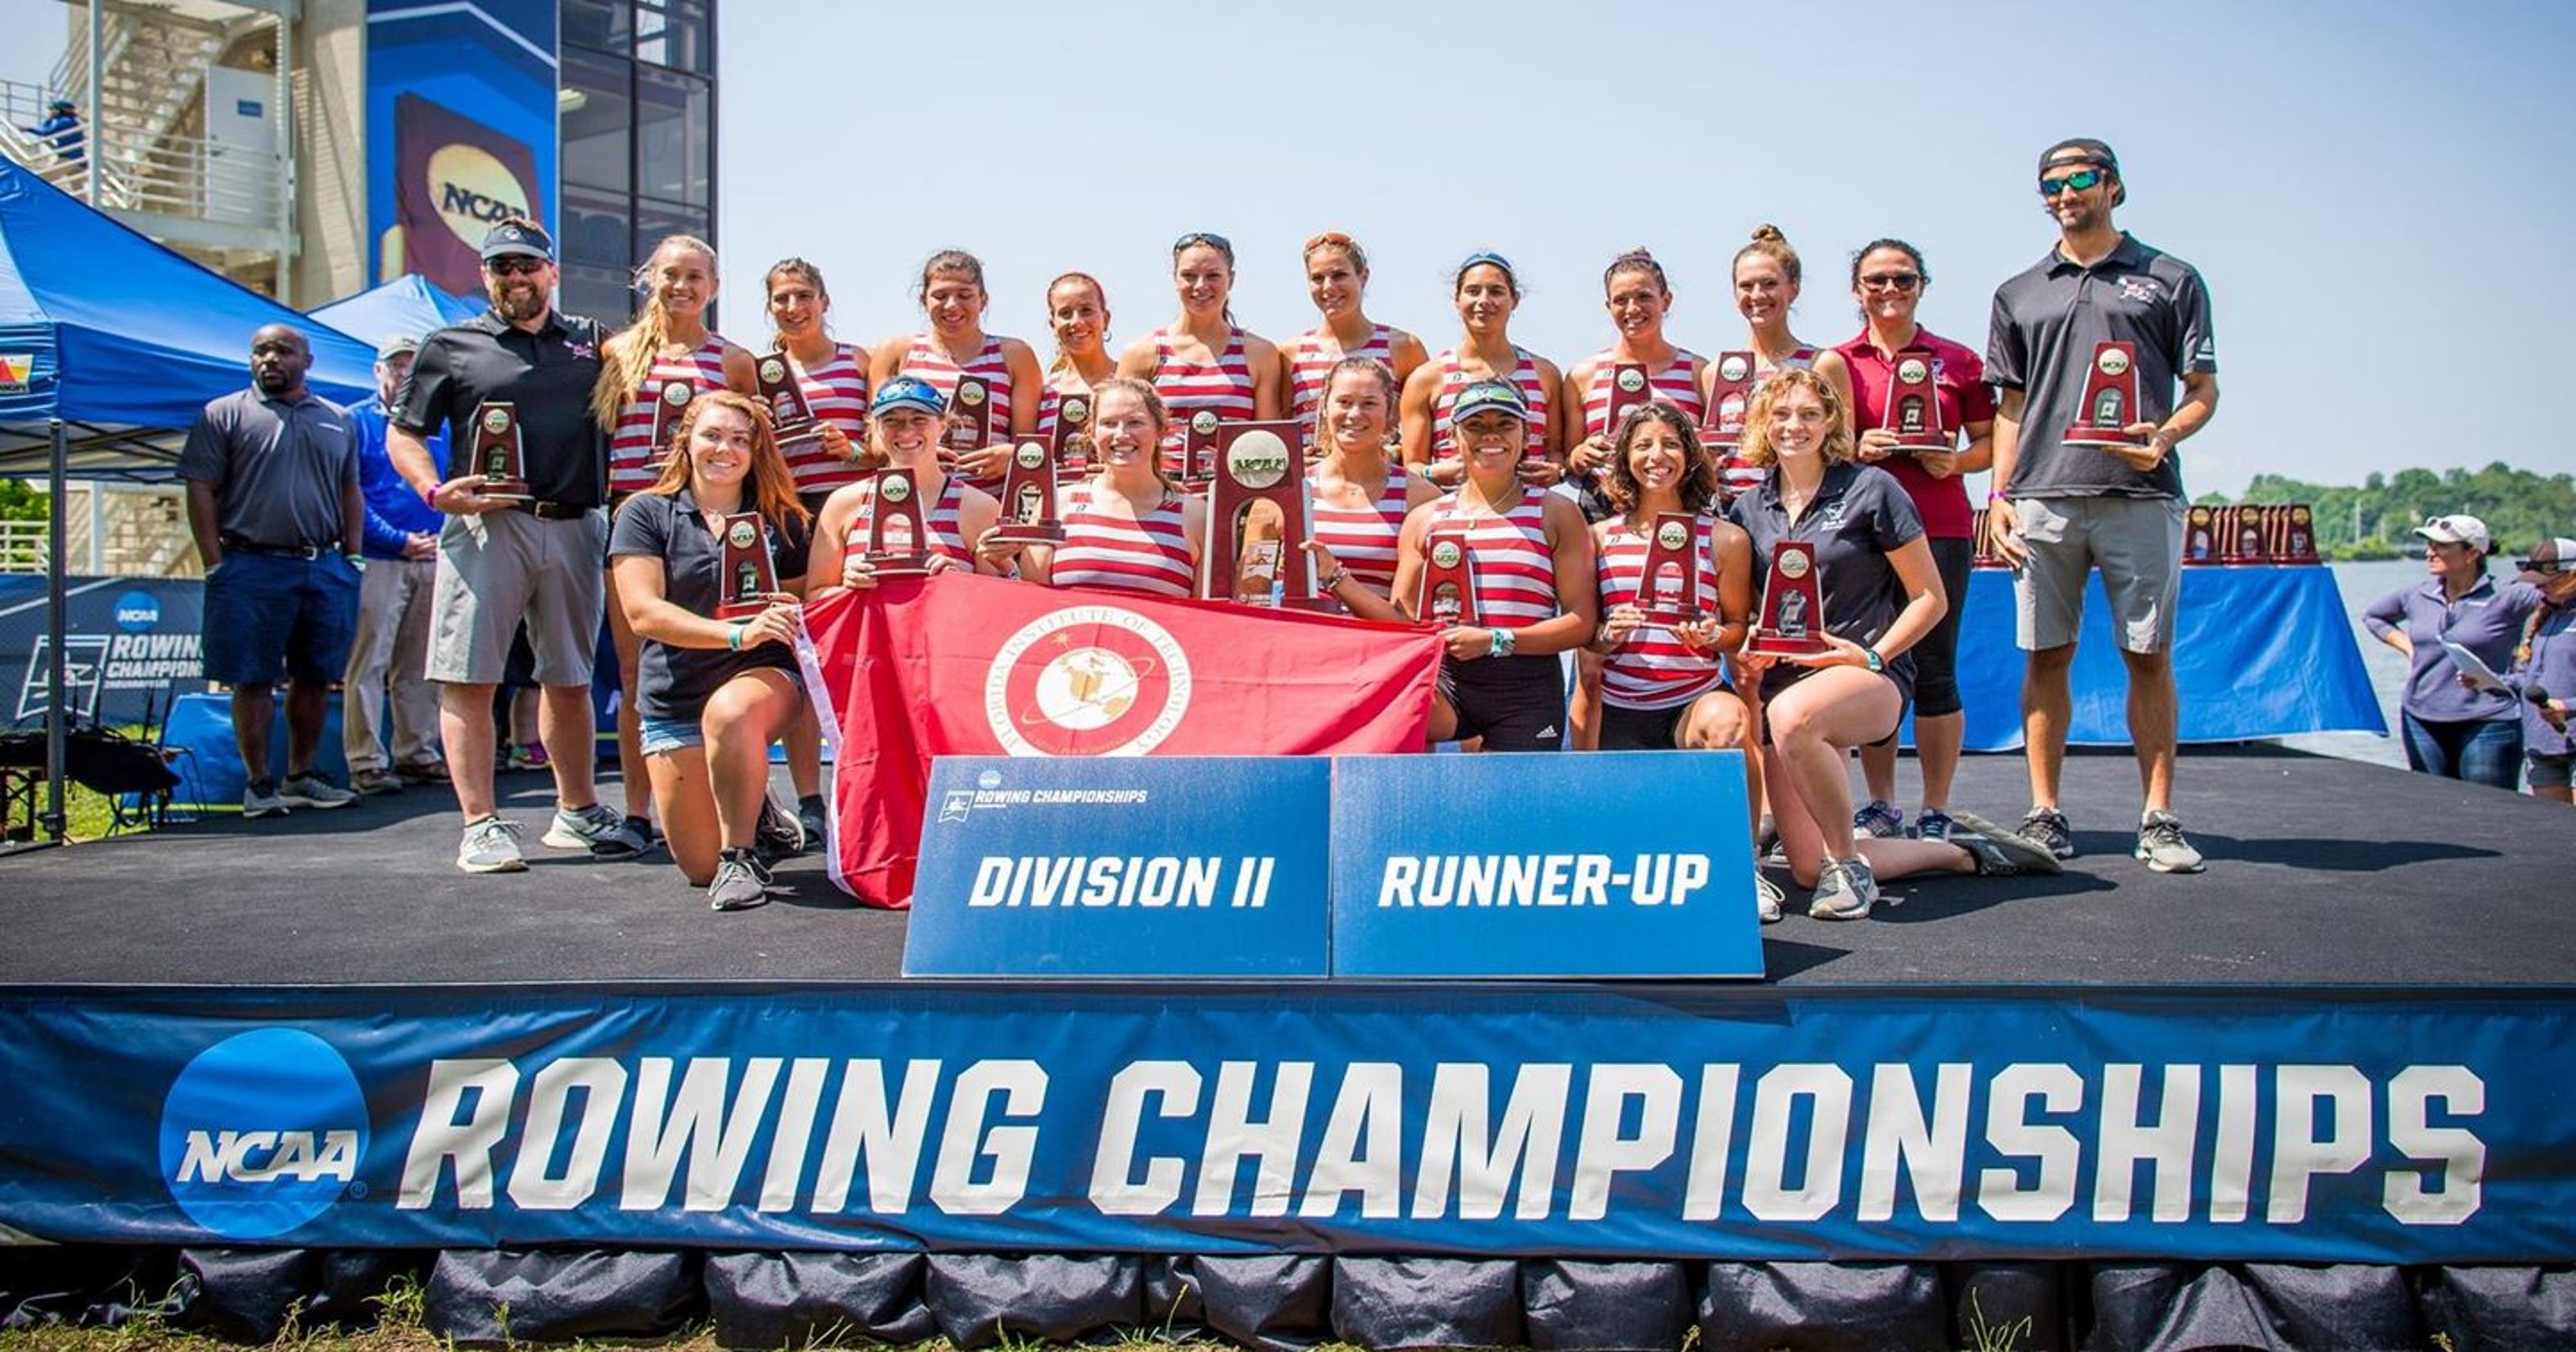 Florida Tech women's rowing team finishes second at NCAA Division II